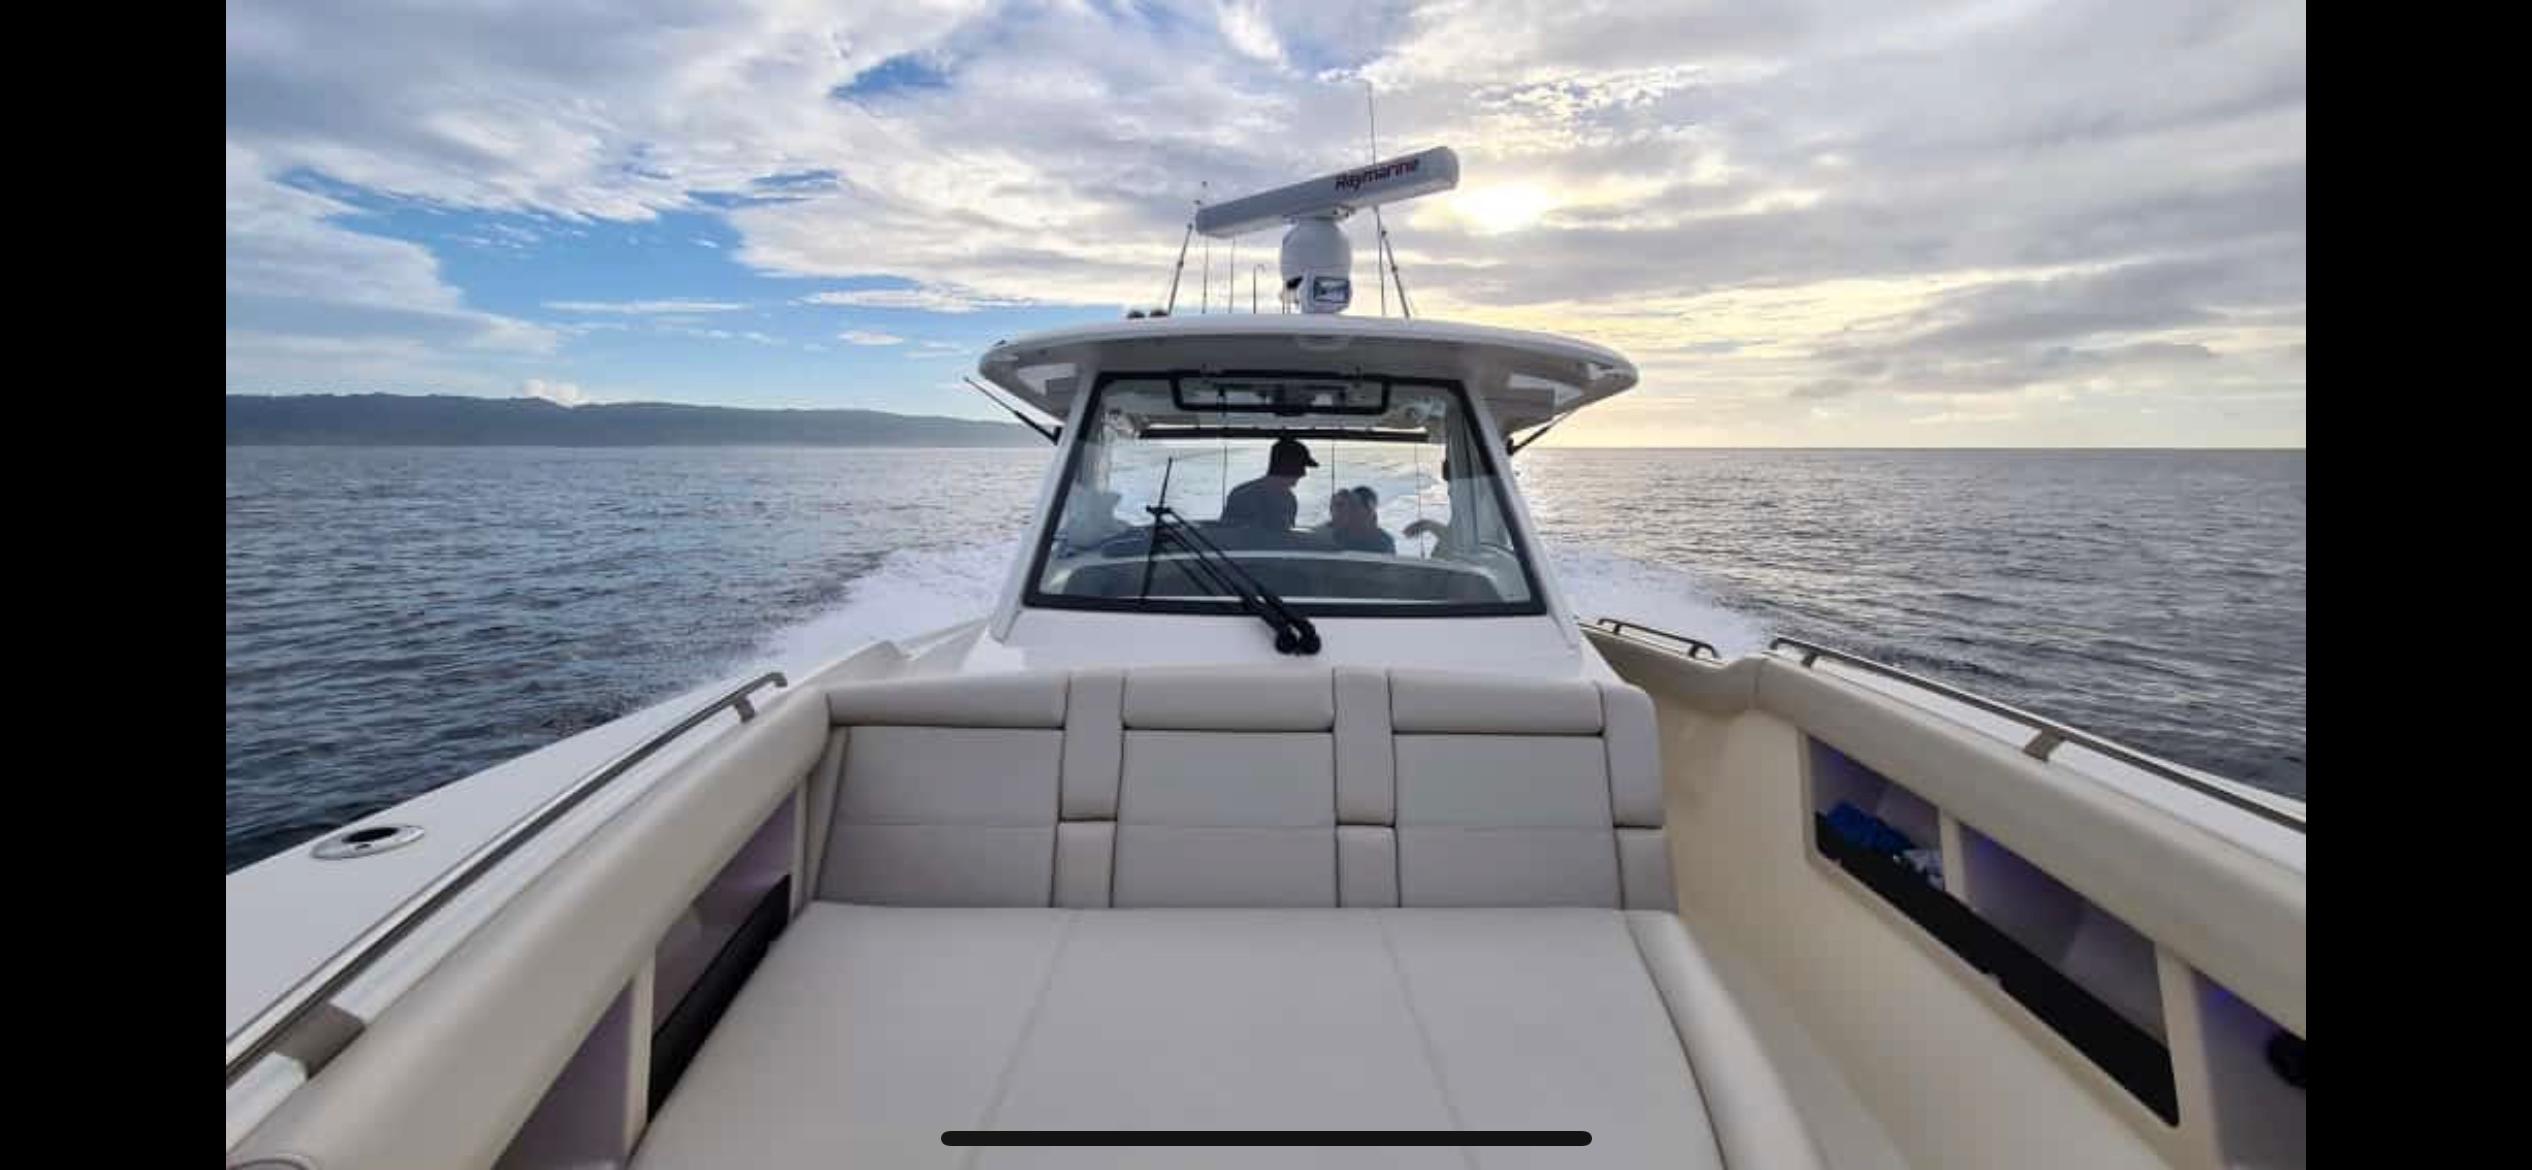 Trip Yacht for Sale, 35 Boston Whaler Yachts Quepos, Costa Rica